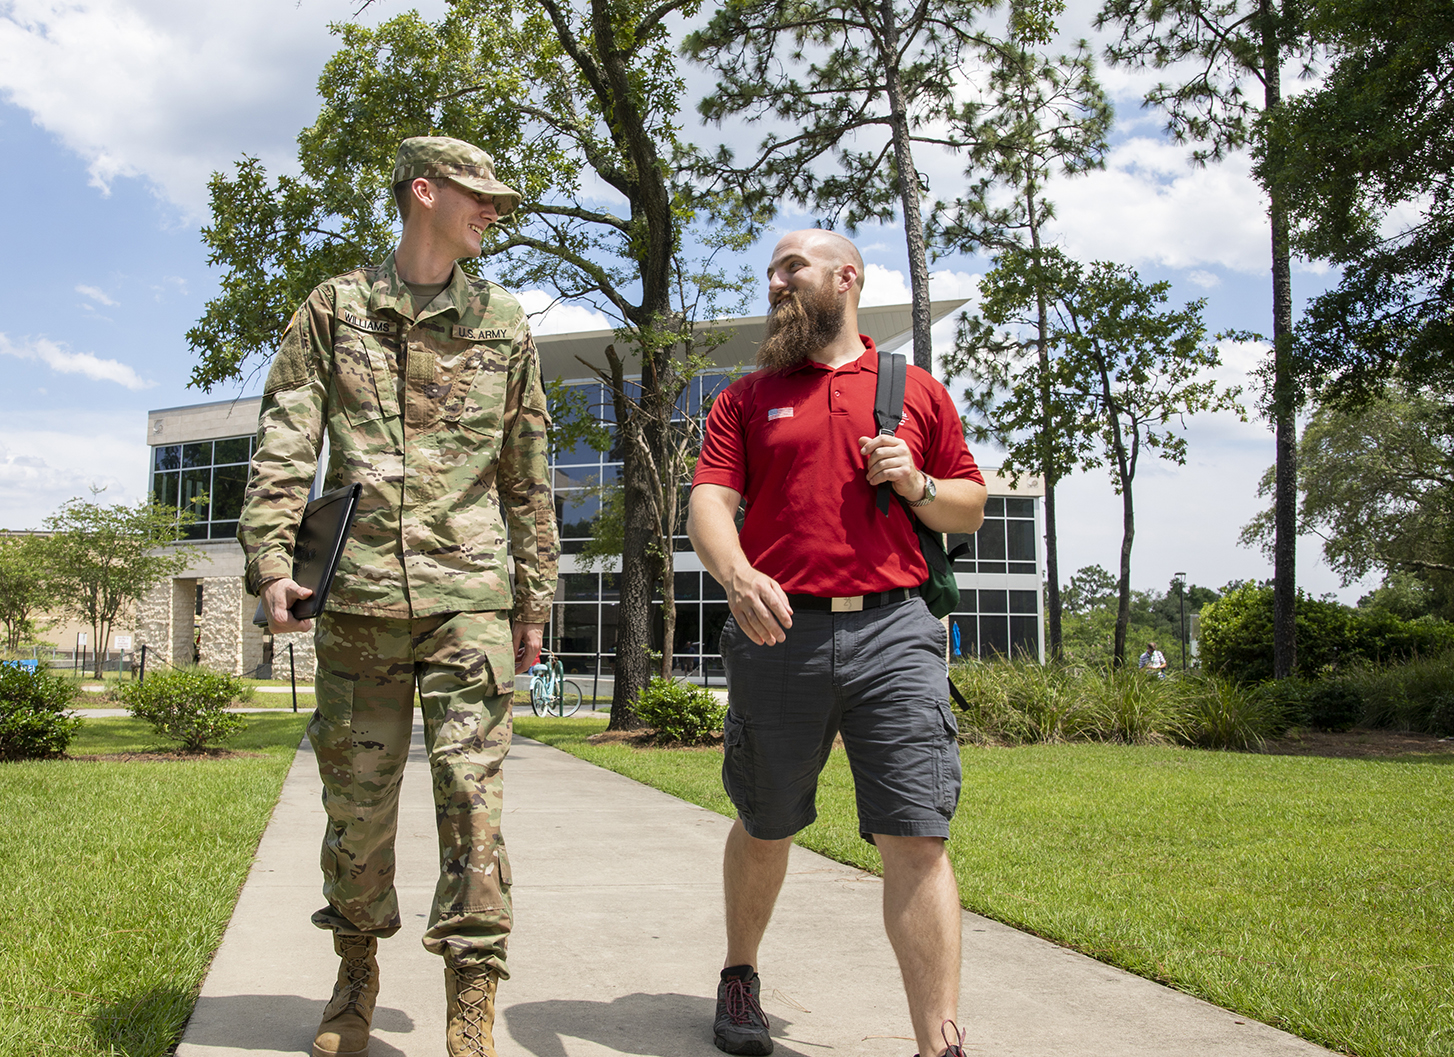 With Pensacola being home to many current and former members of the Armed Forces, the University of West Florida extends its support of those in the military seeking educational opportunities. Consistently ranked a military friendly school, UWF offers the resources needed to those who serve our country proudly.